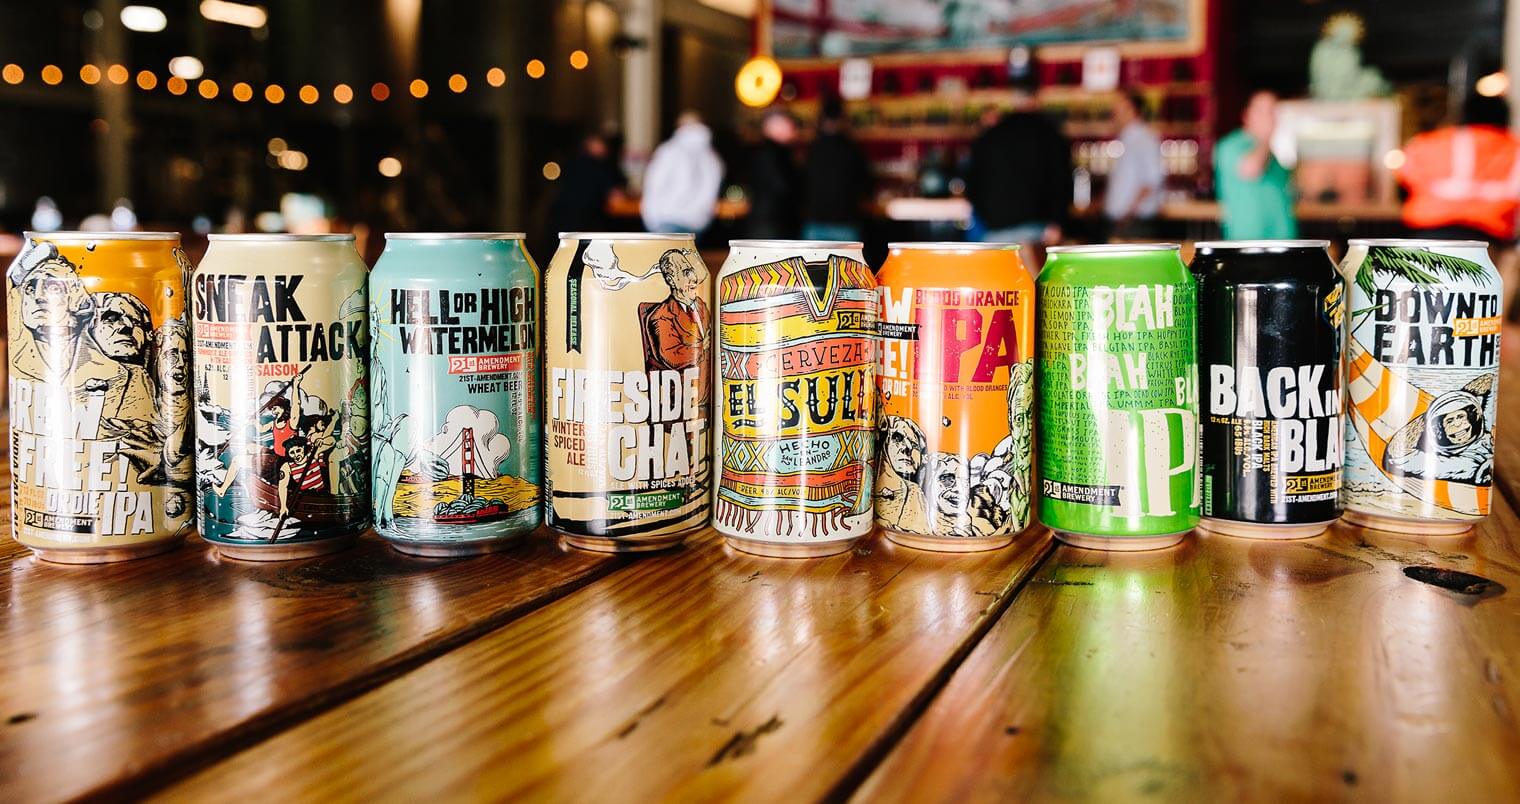 21st Amendment Brewery Lineup, cans on bartop featured image